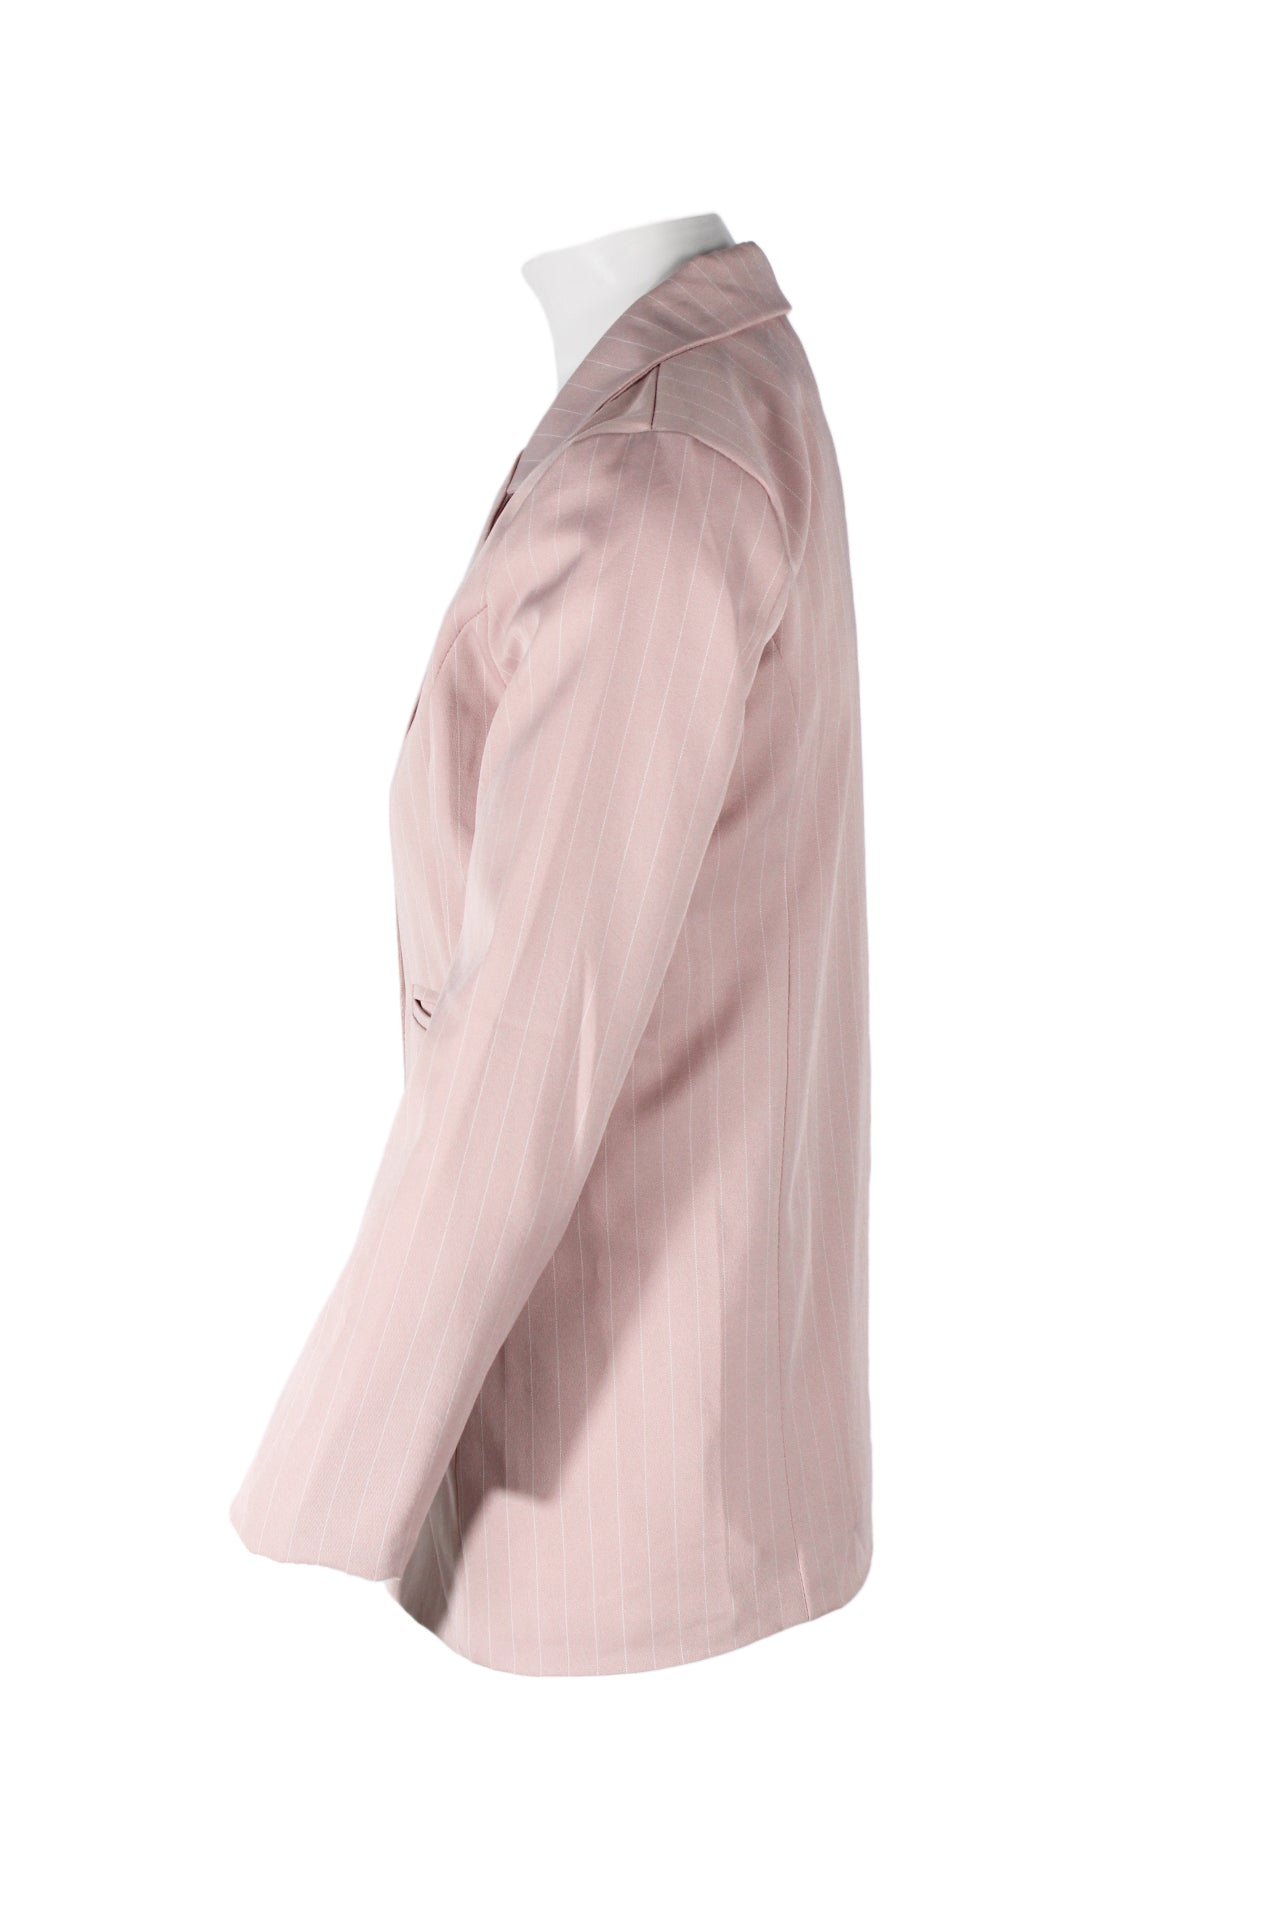 profile angle of w•z dusty pink and white pinstripe blazer on feminine mannequin bust featuring jetted front pockets.